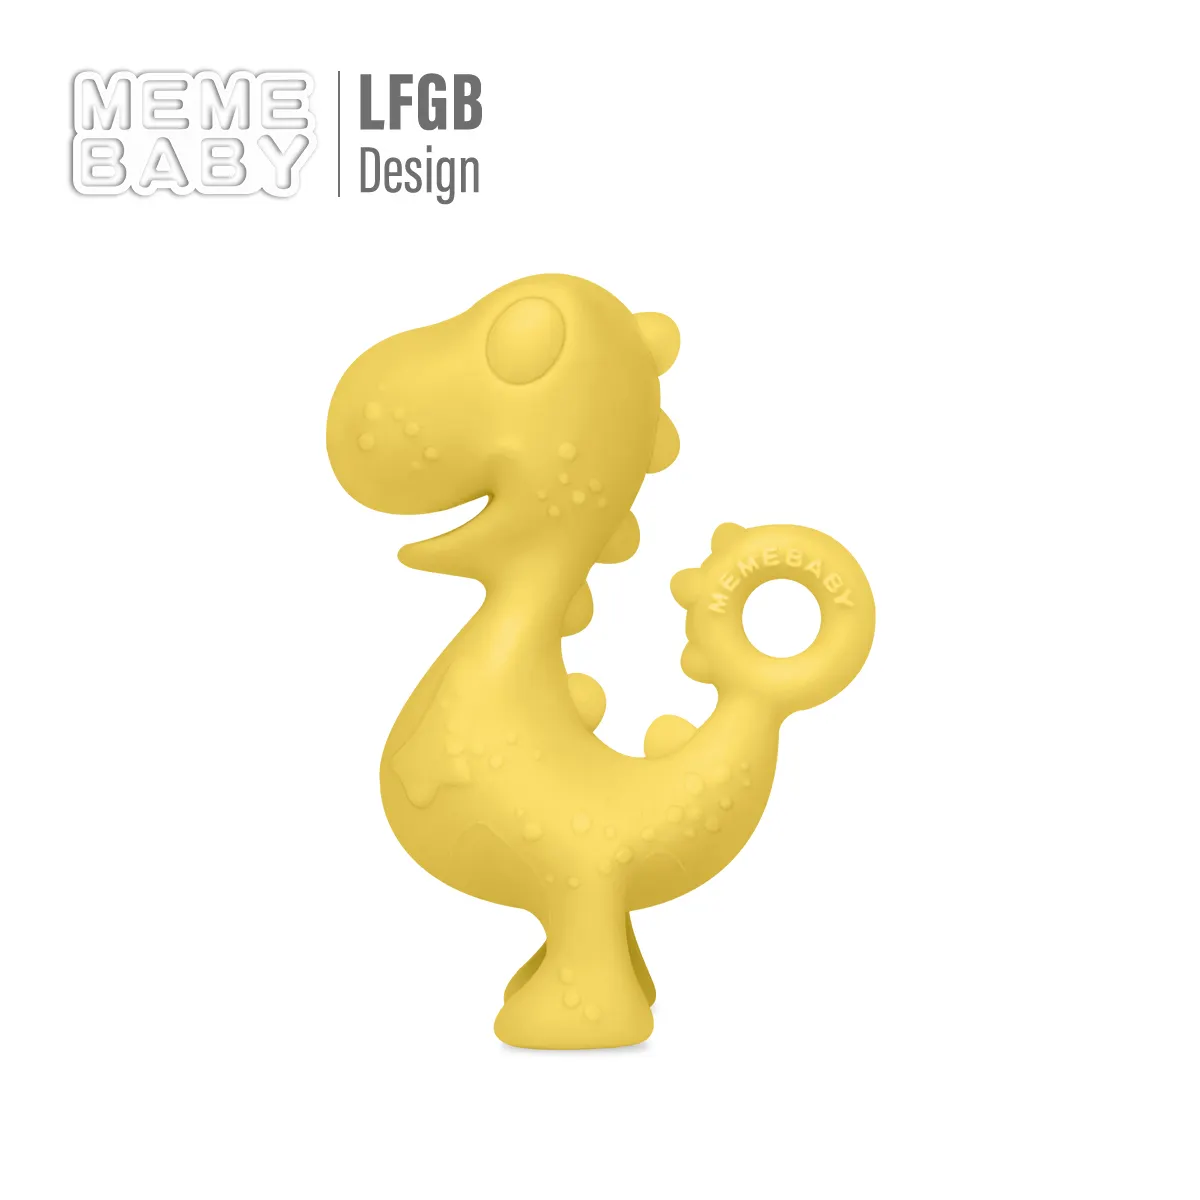 Dinosaur bpa free silicone teether Shape High Quality Safe Colorful Soft baby Silicone Teether